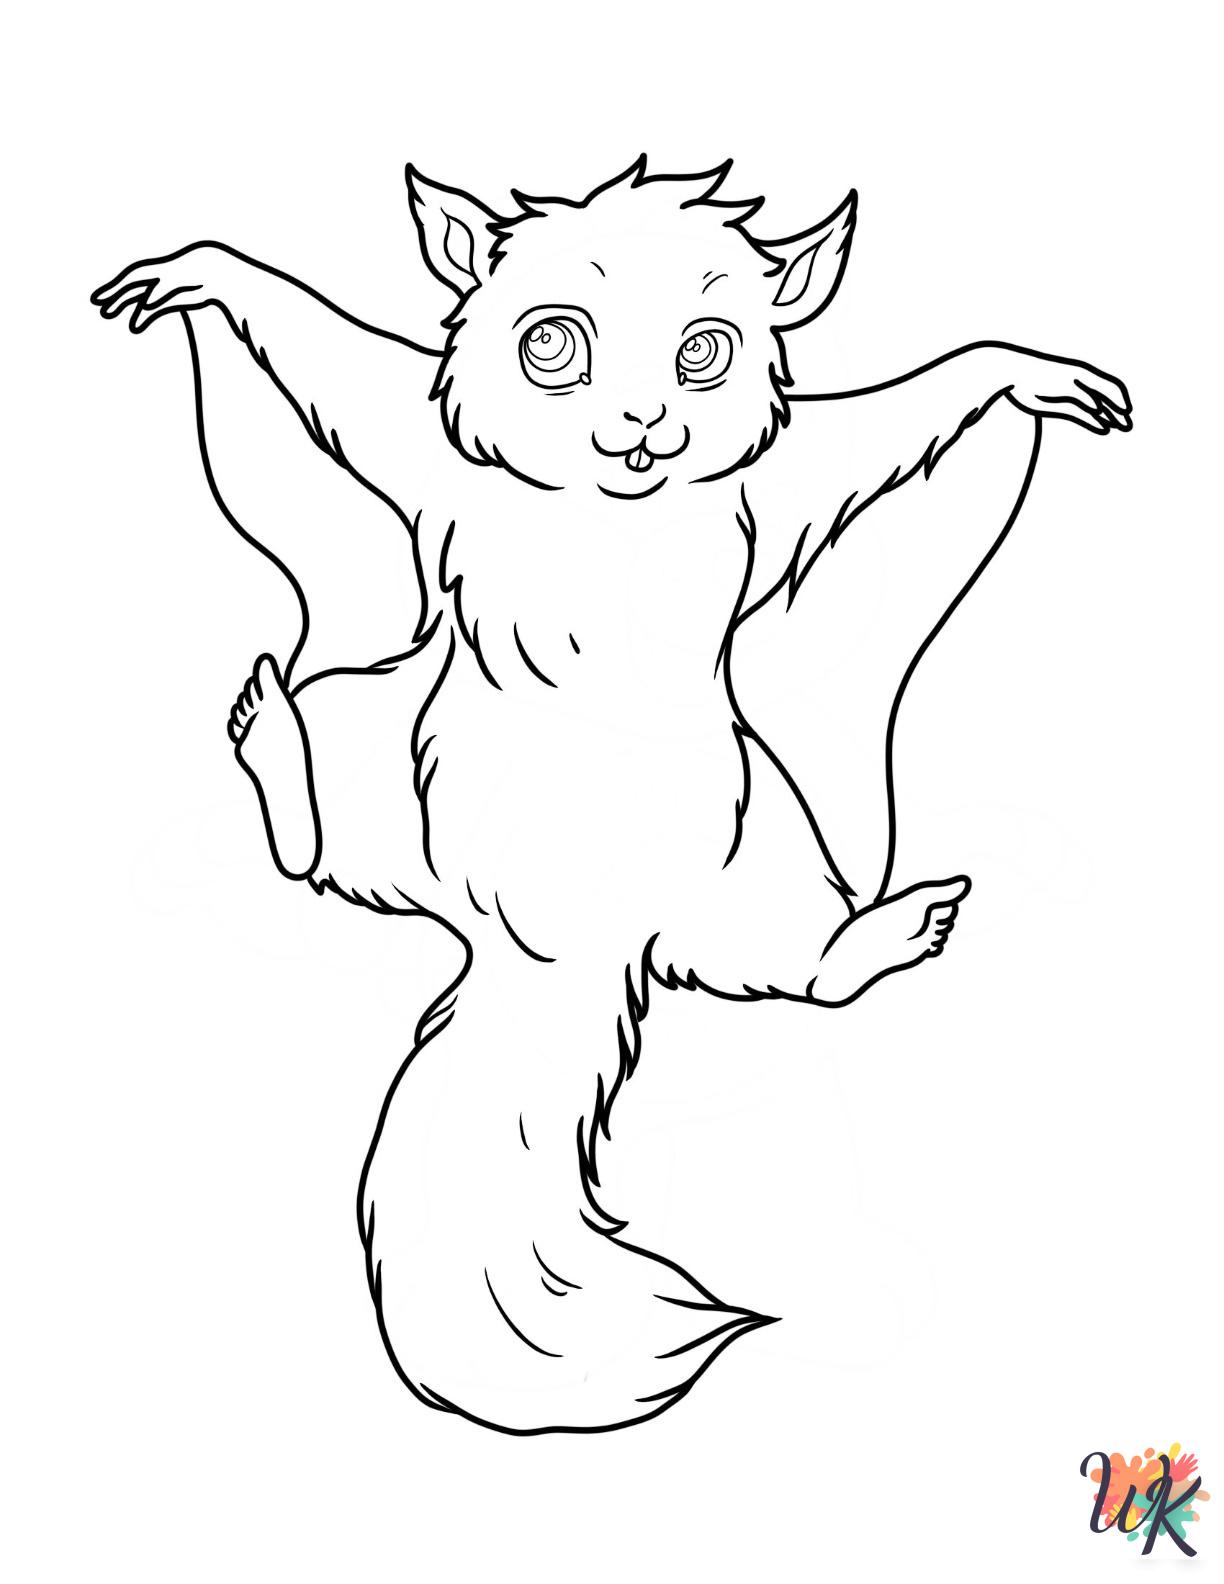 Squirrel cards coloring pages